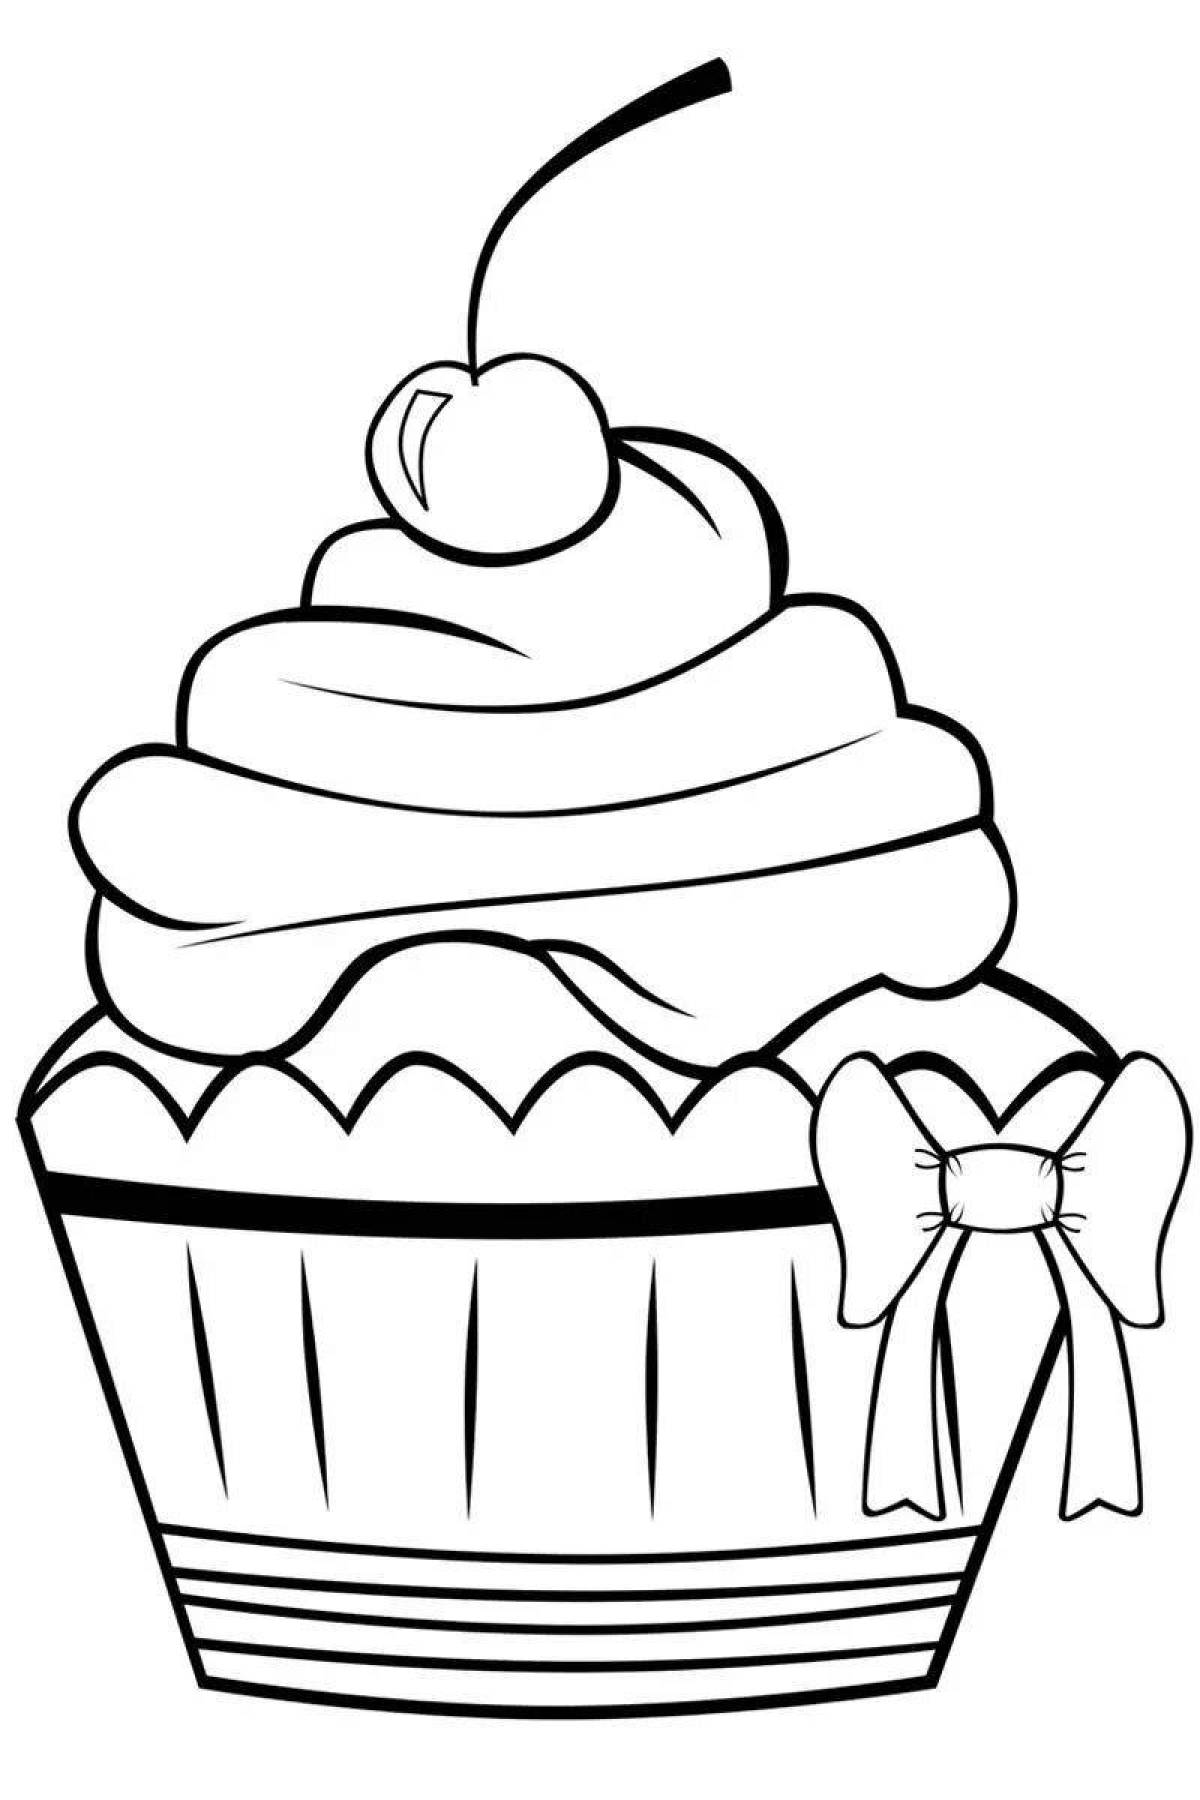 Living cake coloring book for kids